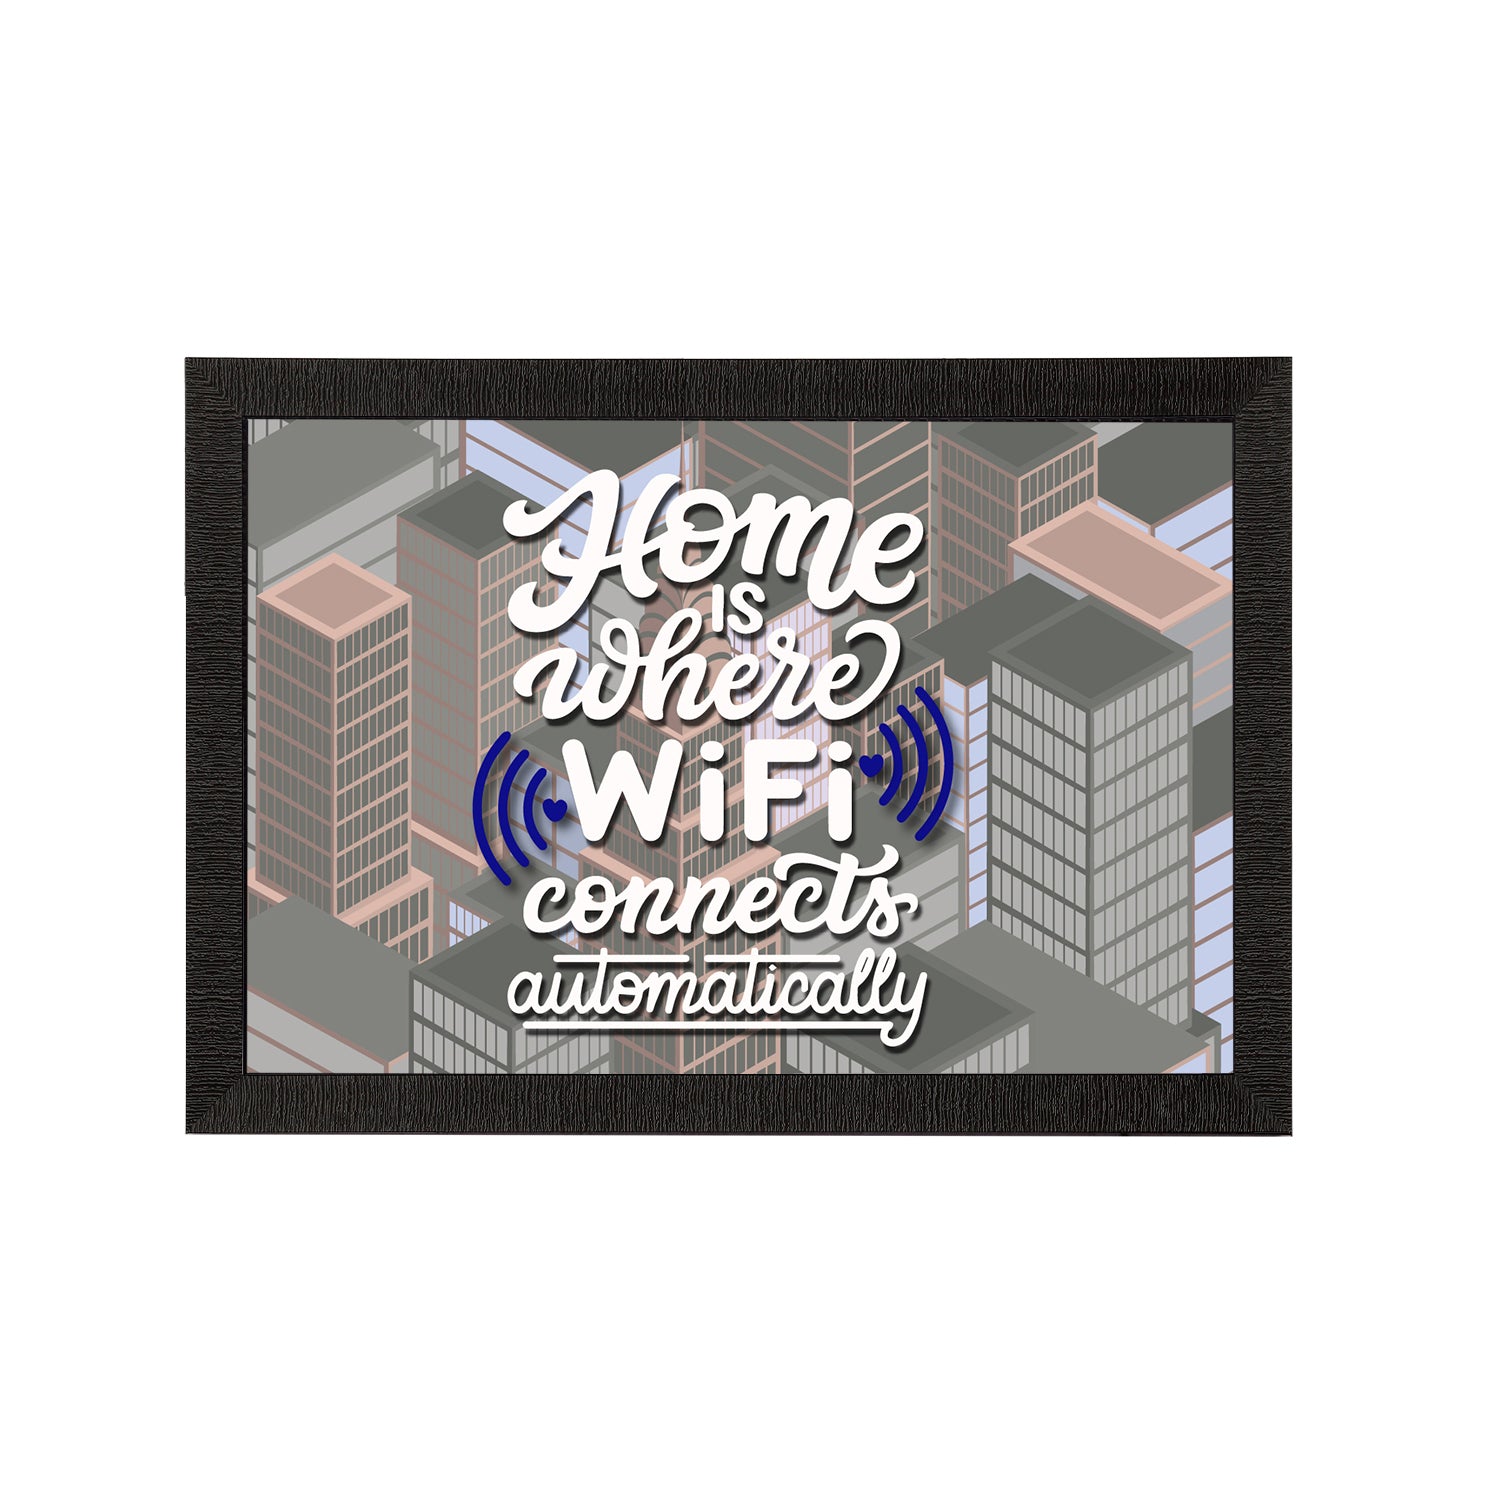 Home Is Where WiFi Connects Automatically" Motivational Quote Satin Matt Texture UV Art Painting